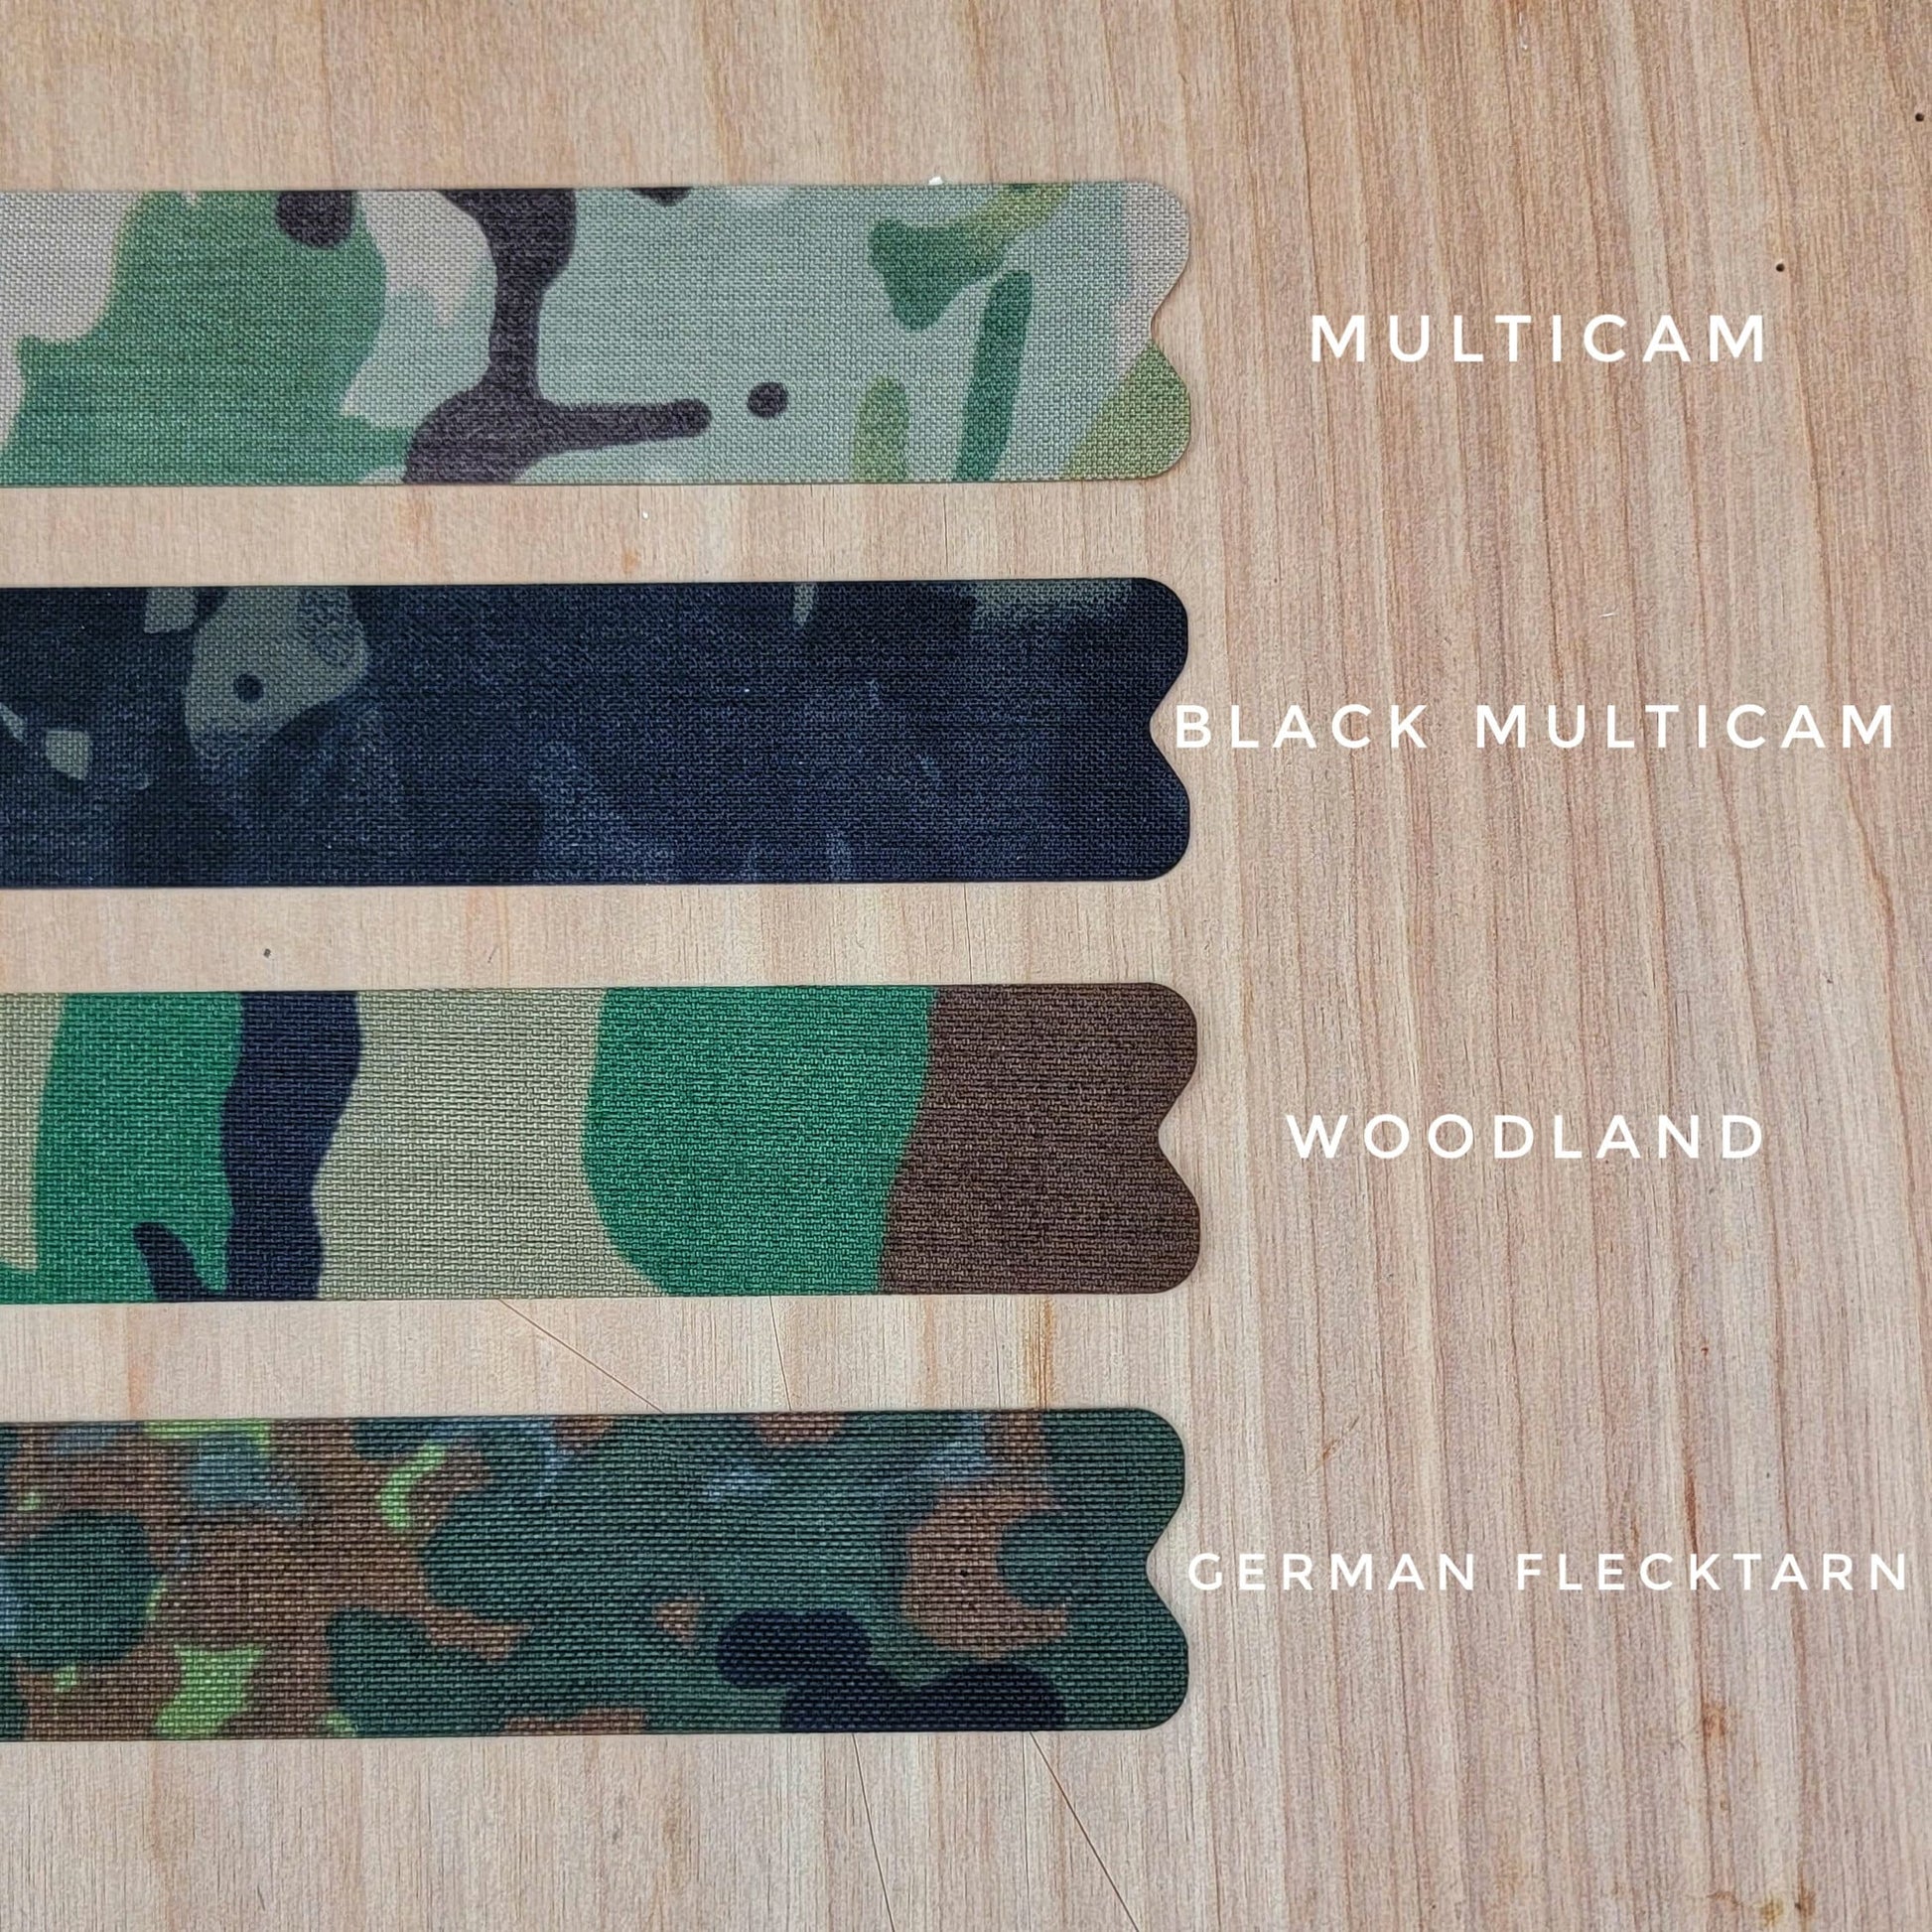 Tact-Wrap airsoft stickers, Cordura cheek rest for B5 Systems Bravo stock, tactical, camo, multicam, holster wrap, decal